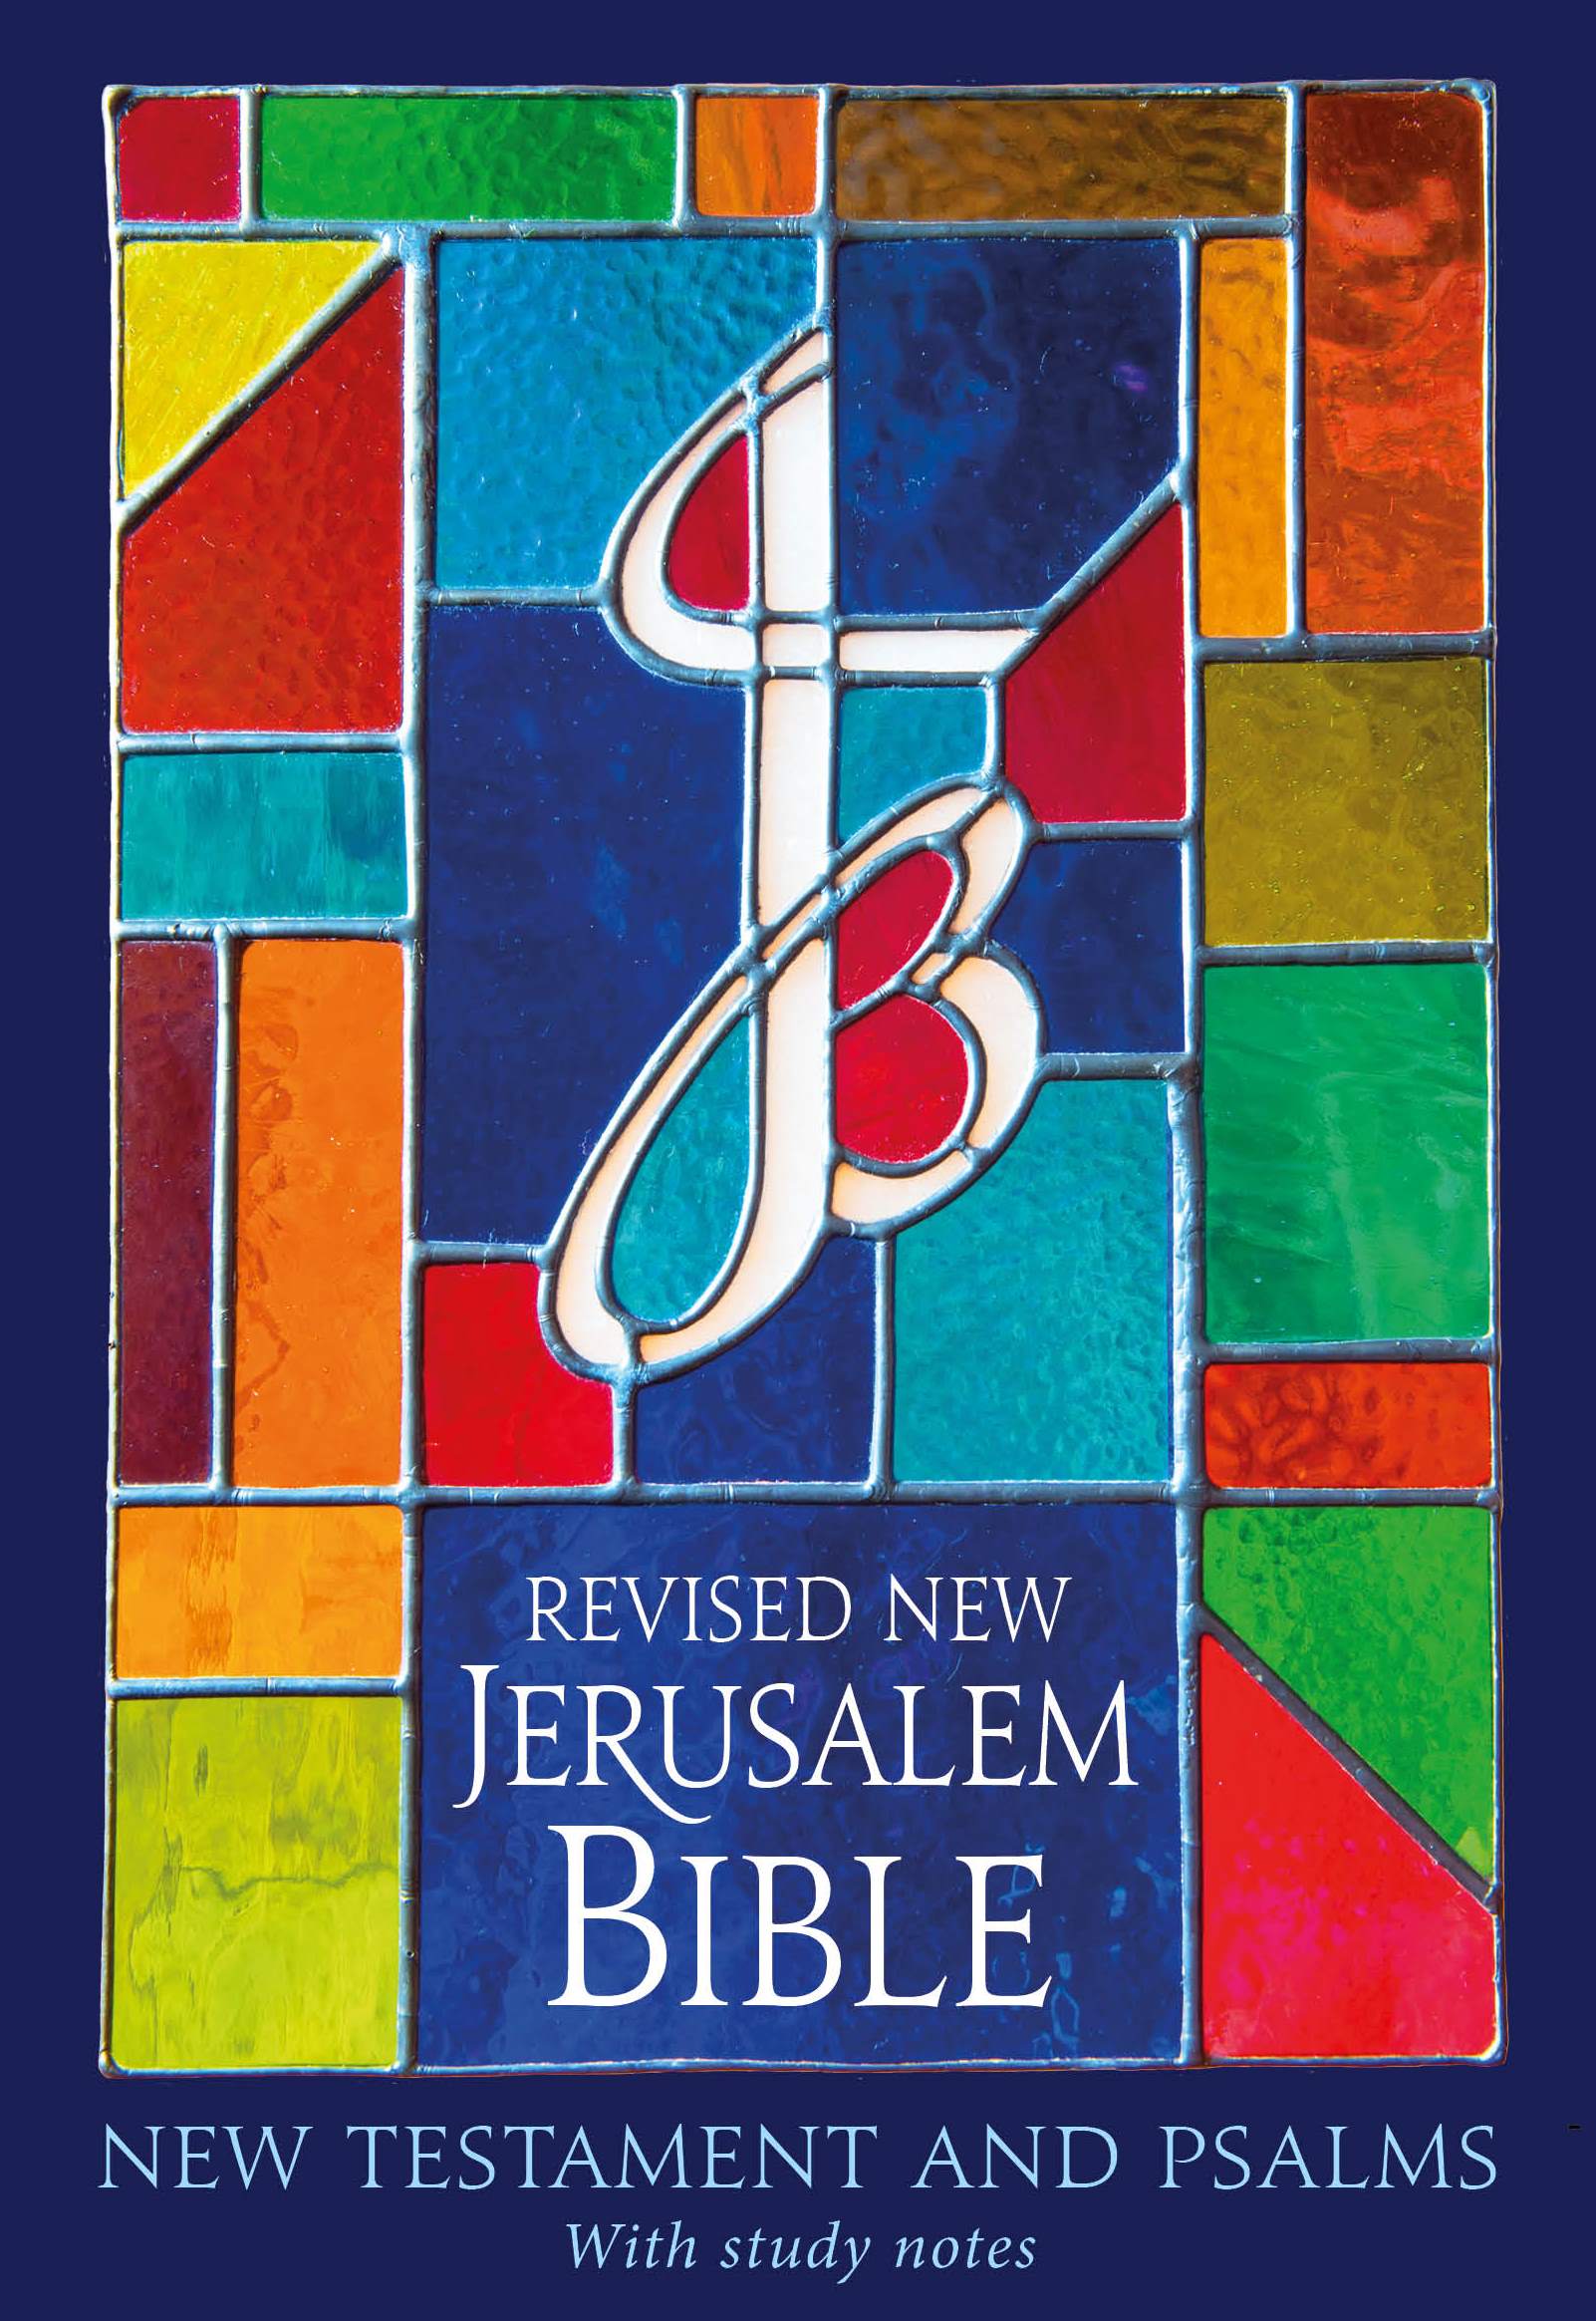 Image of The RNJB: New Testament and Psalms other